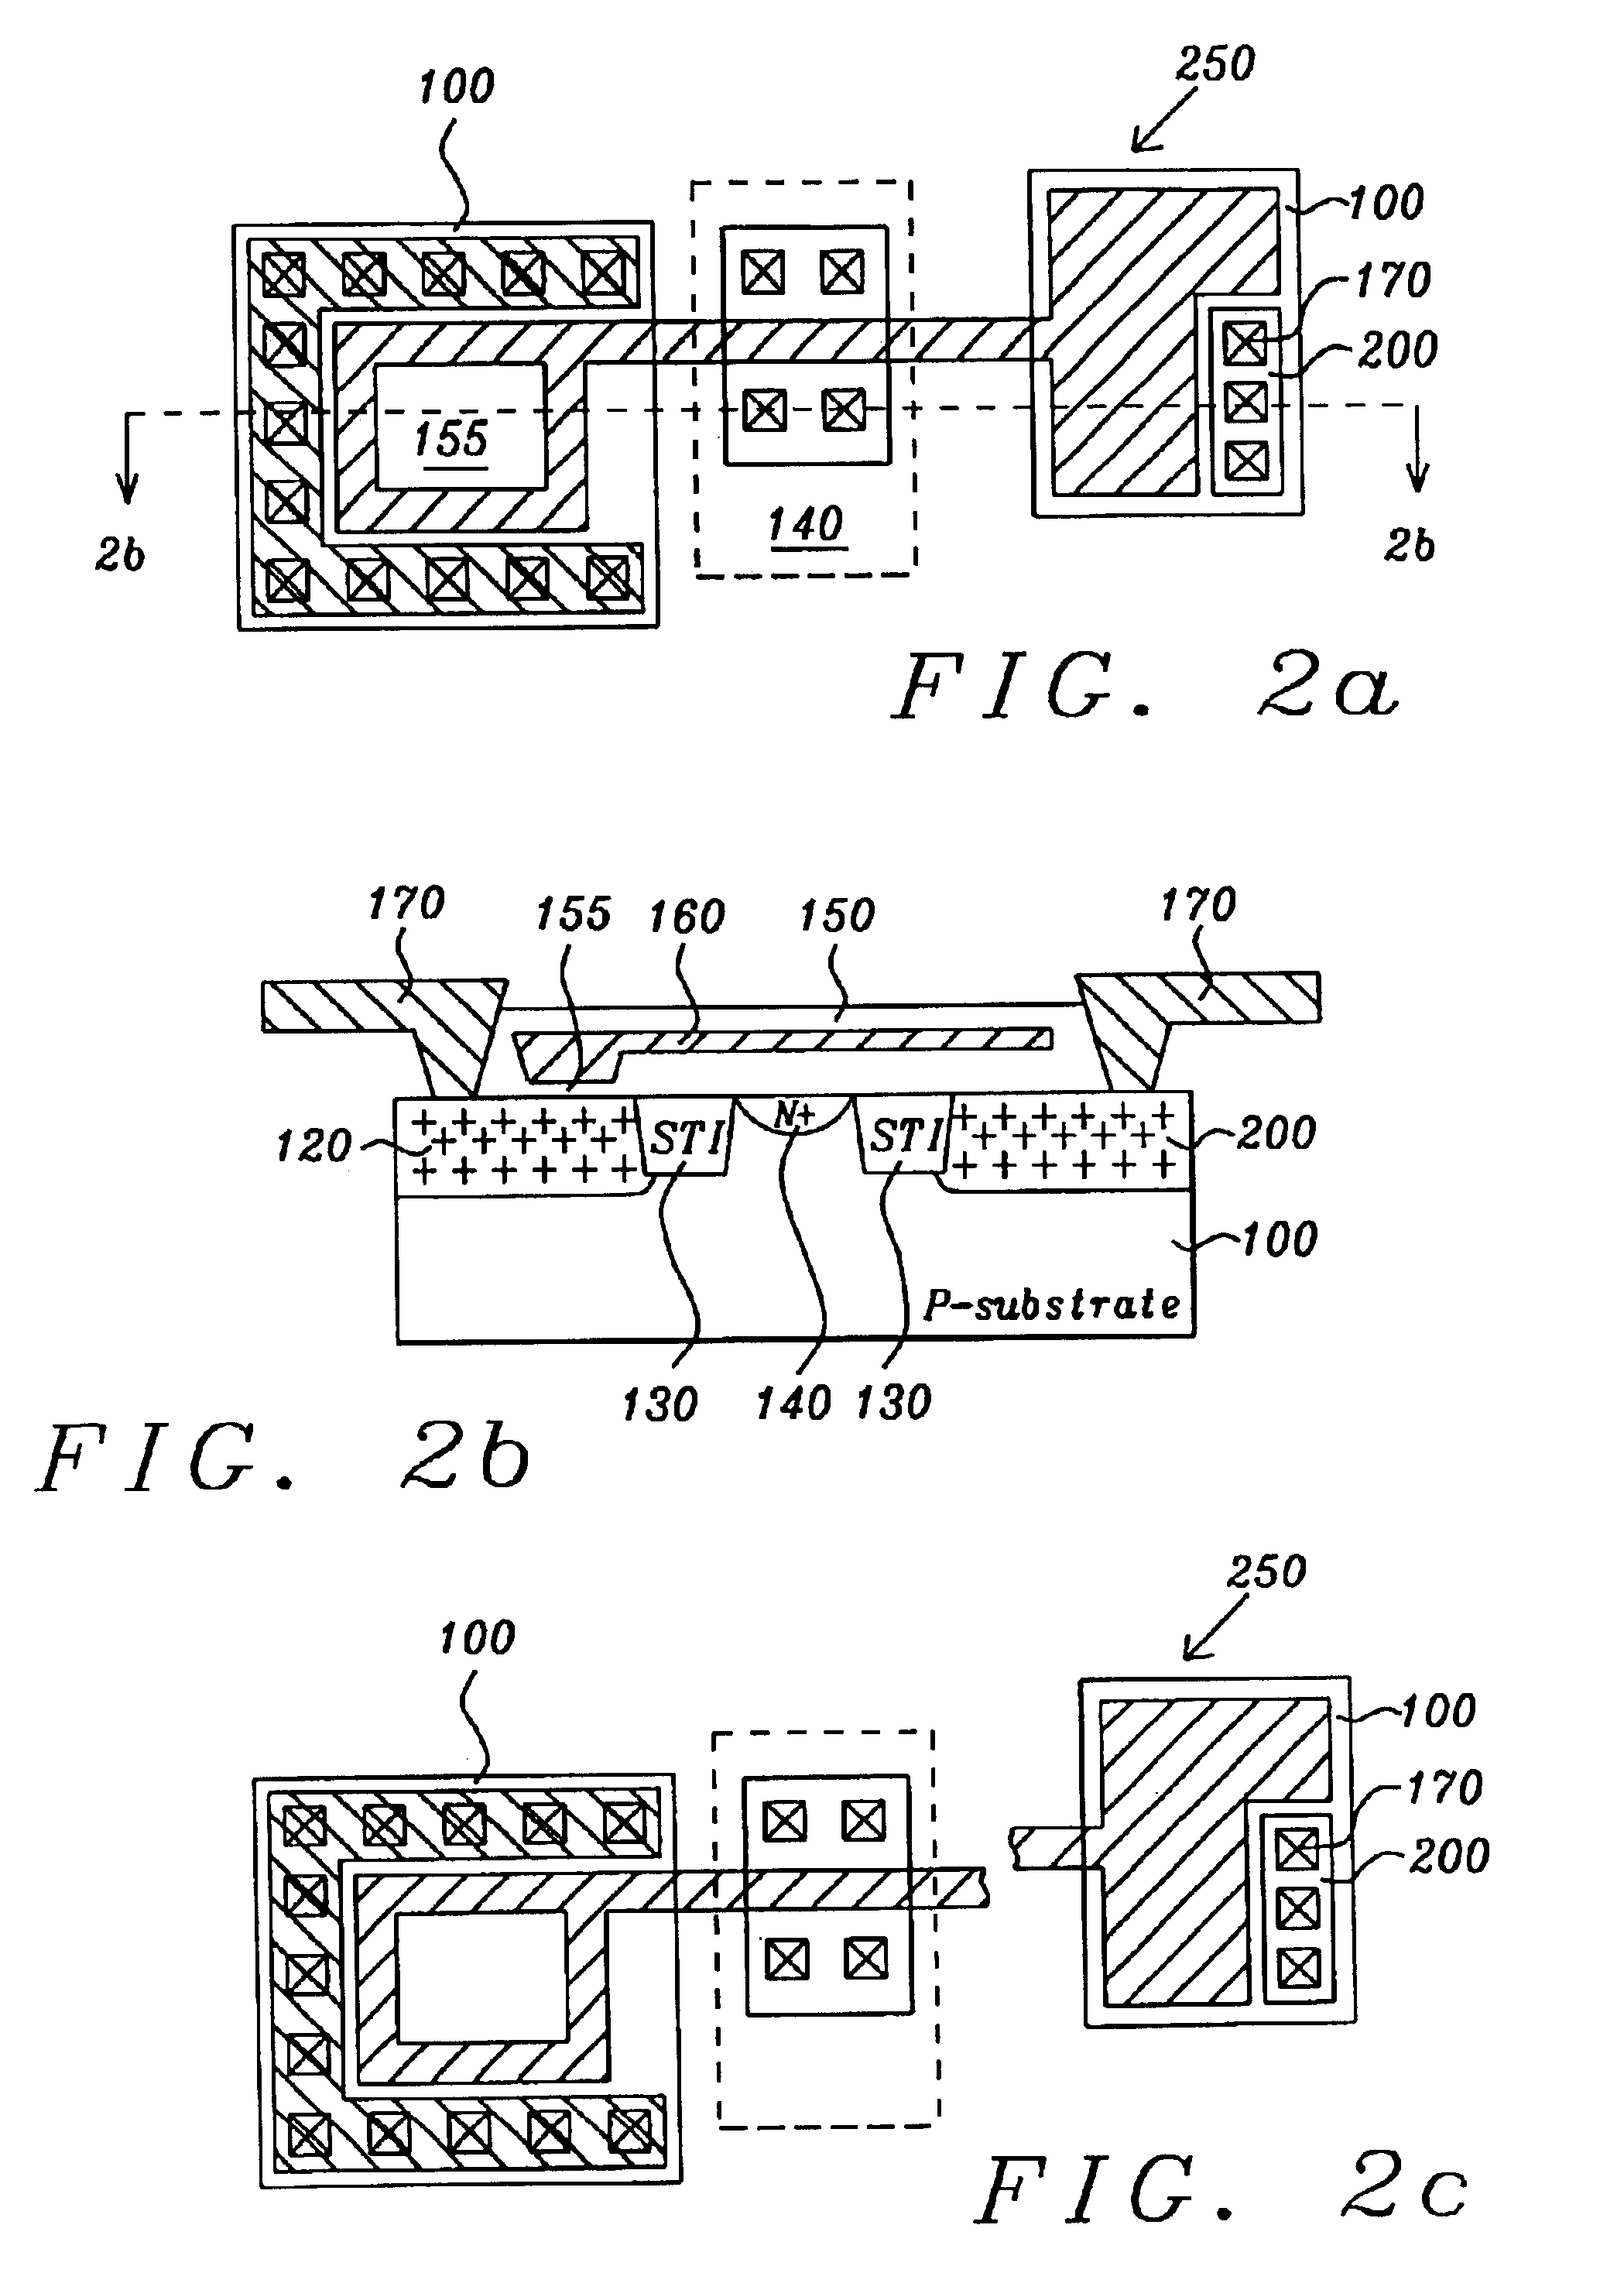 Scaled EEPROM cell by metal-insulator-metal (MIM) coupling